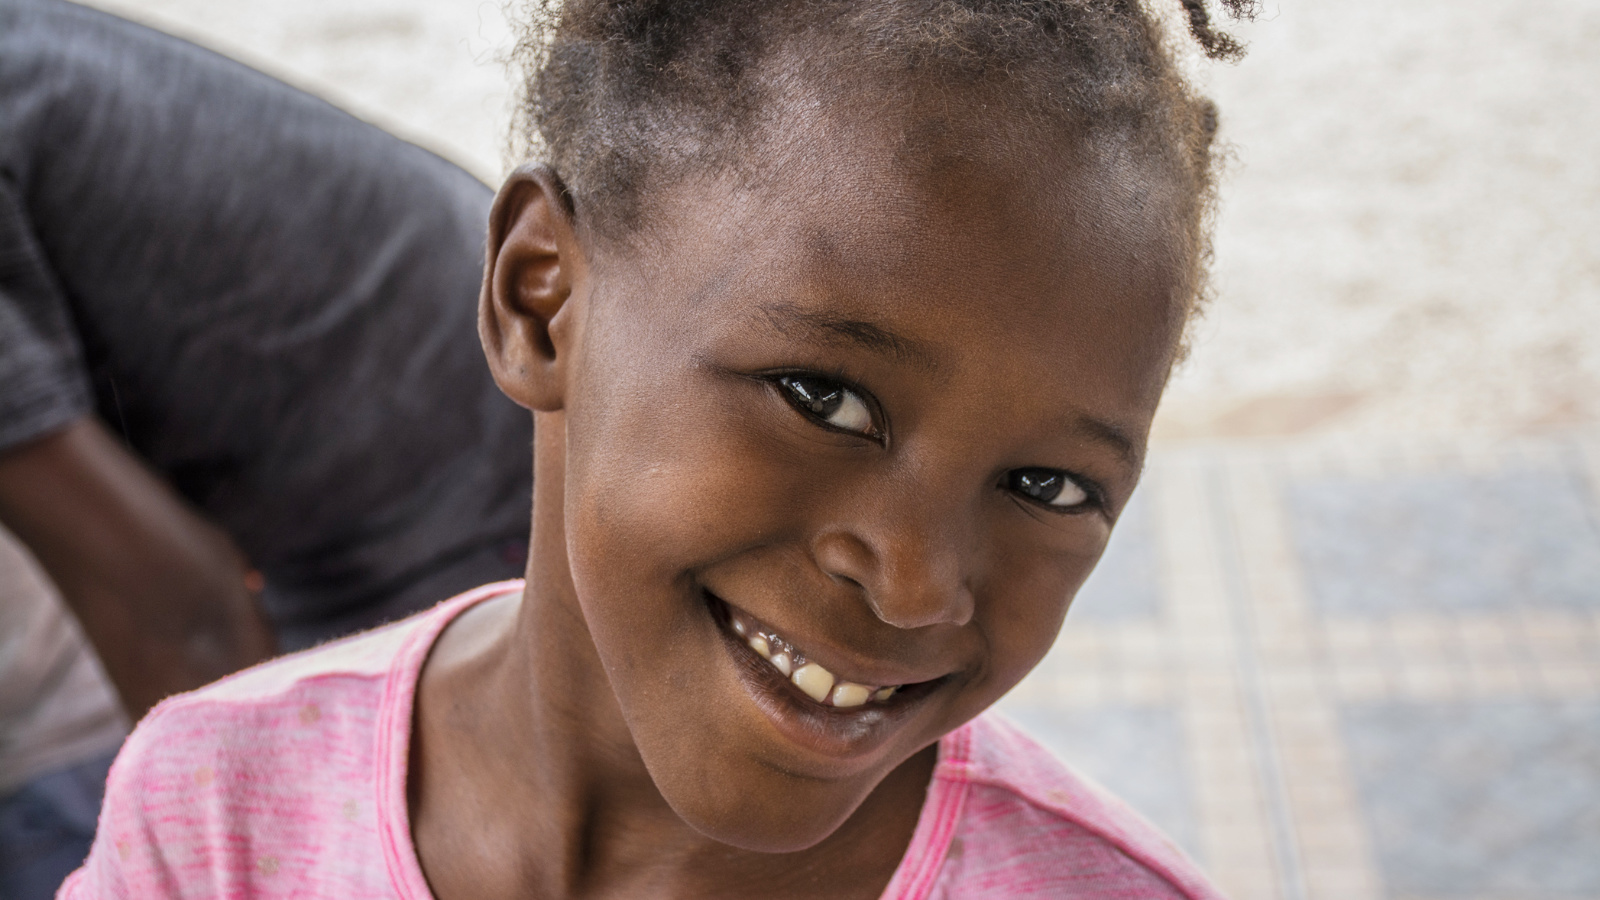 Young Haitian girl in a pink shirt smiling.